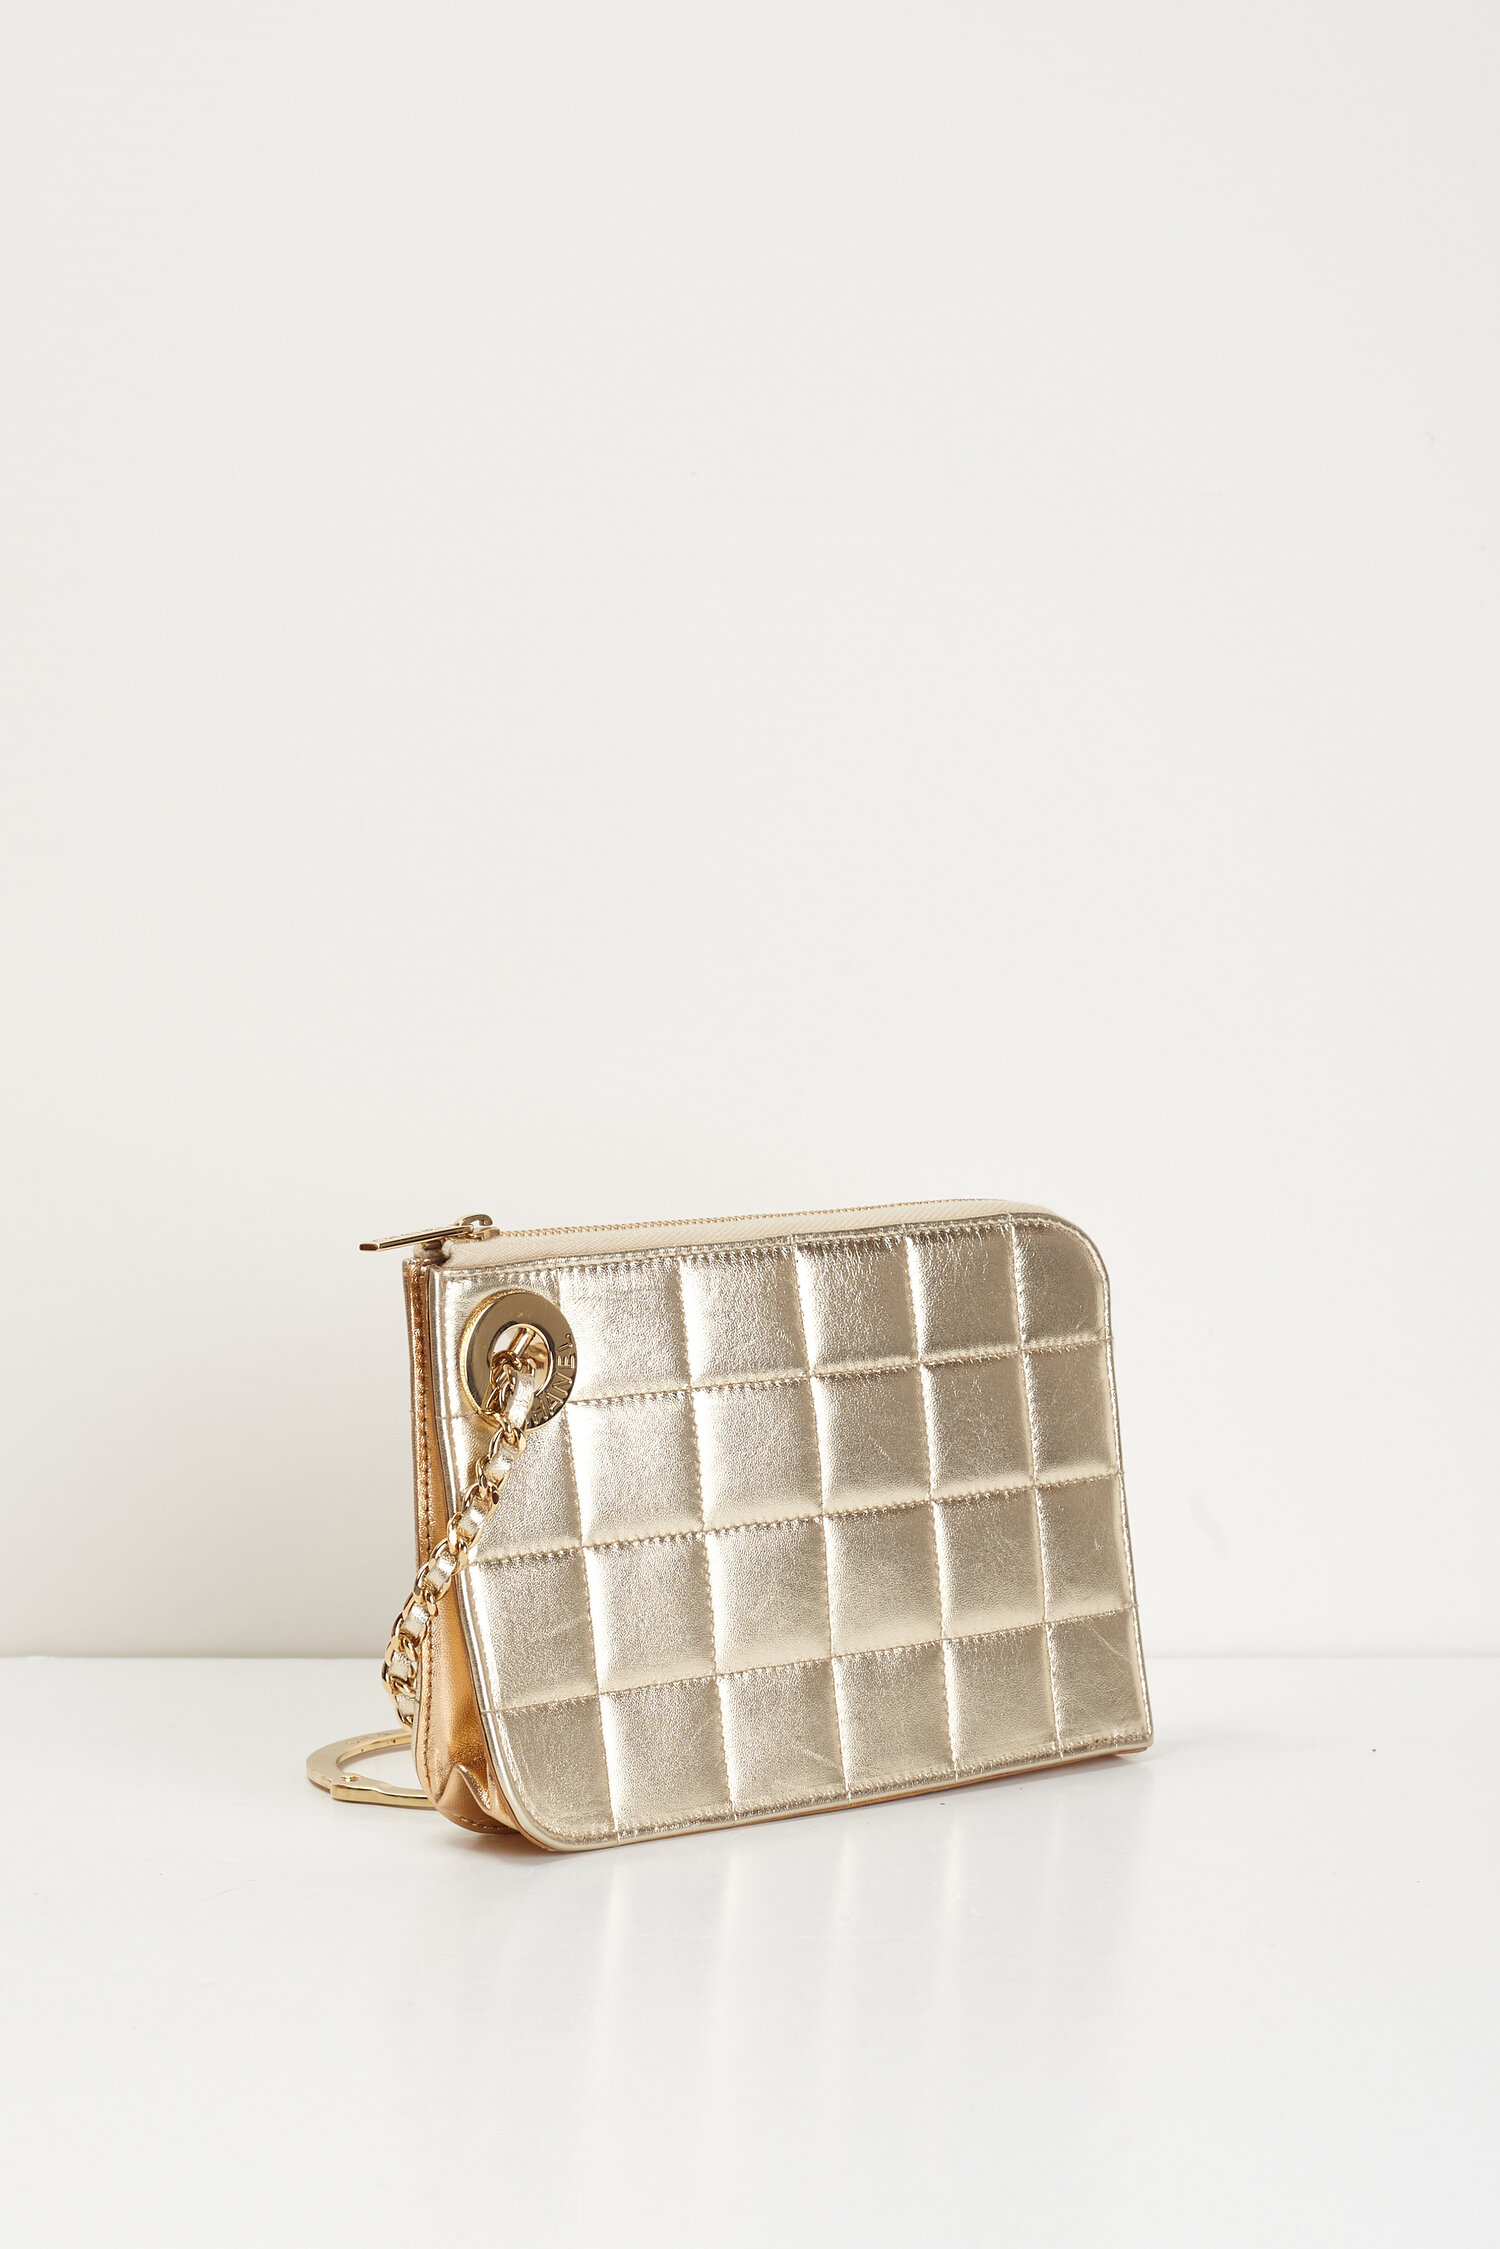 CHANEL 2002-2003 Gold Quilted Cuff Wristlet — Garment